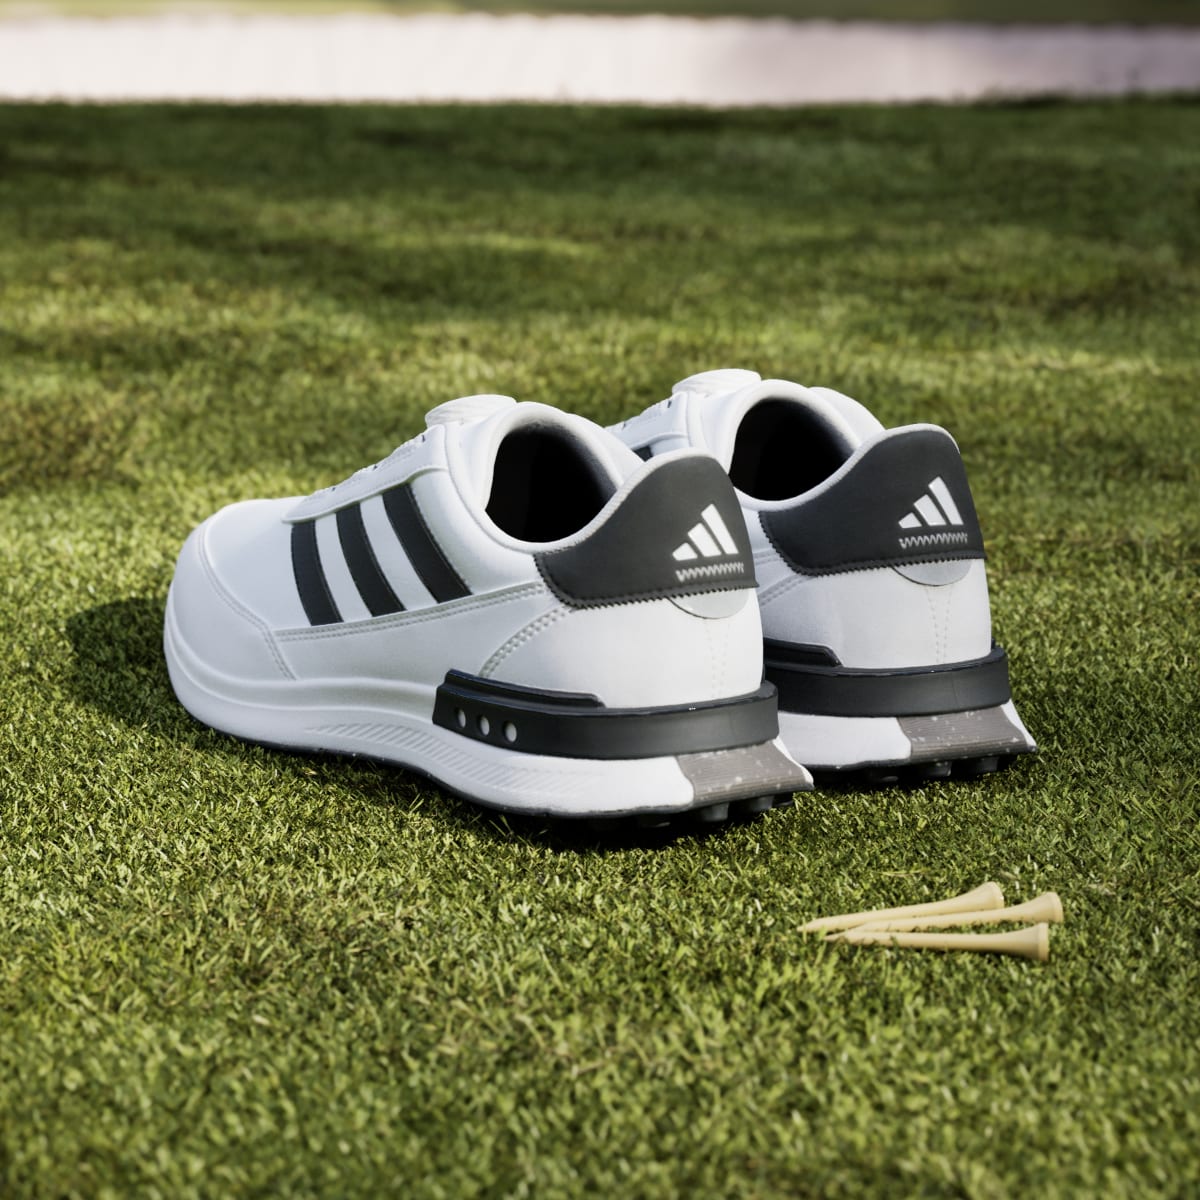 Adidas S2G Spikeless BOA 24 Wide Golf Shoes. 5